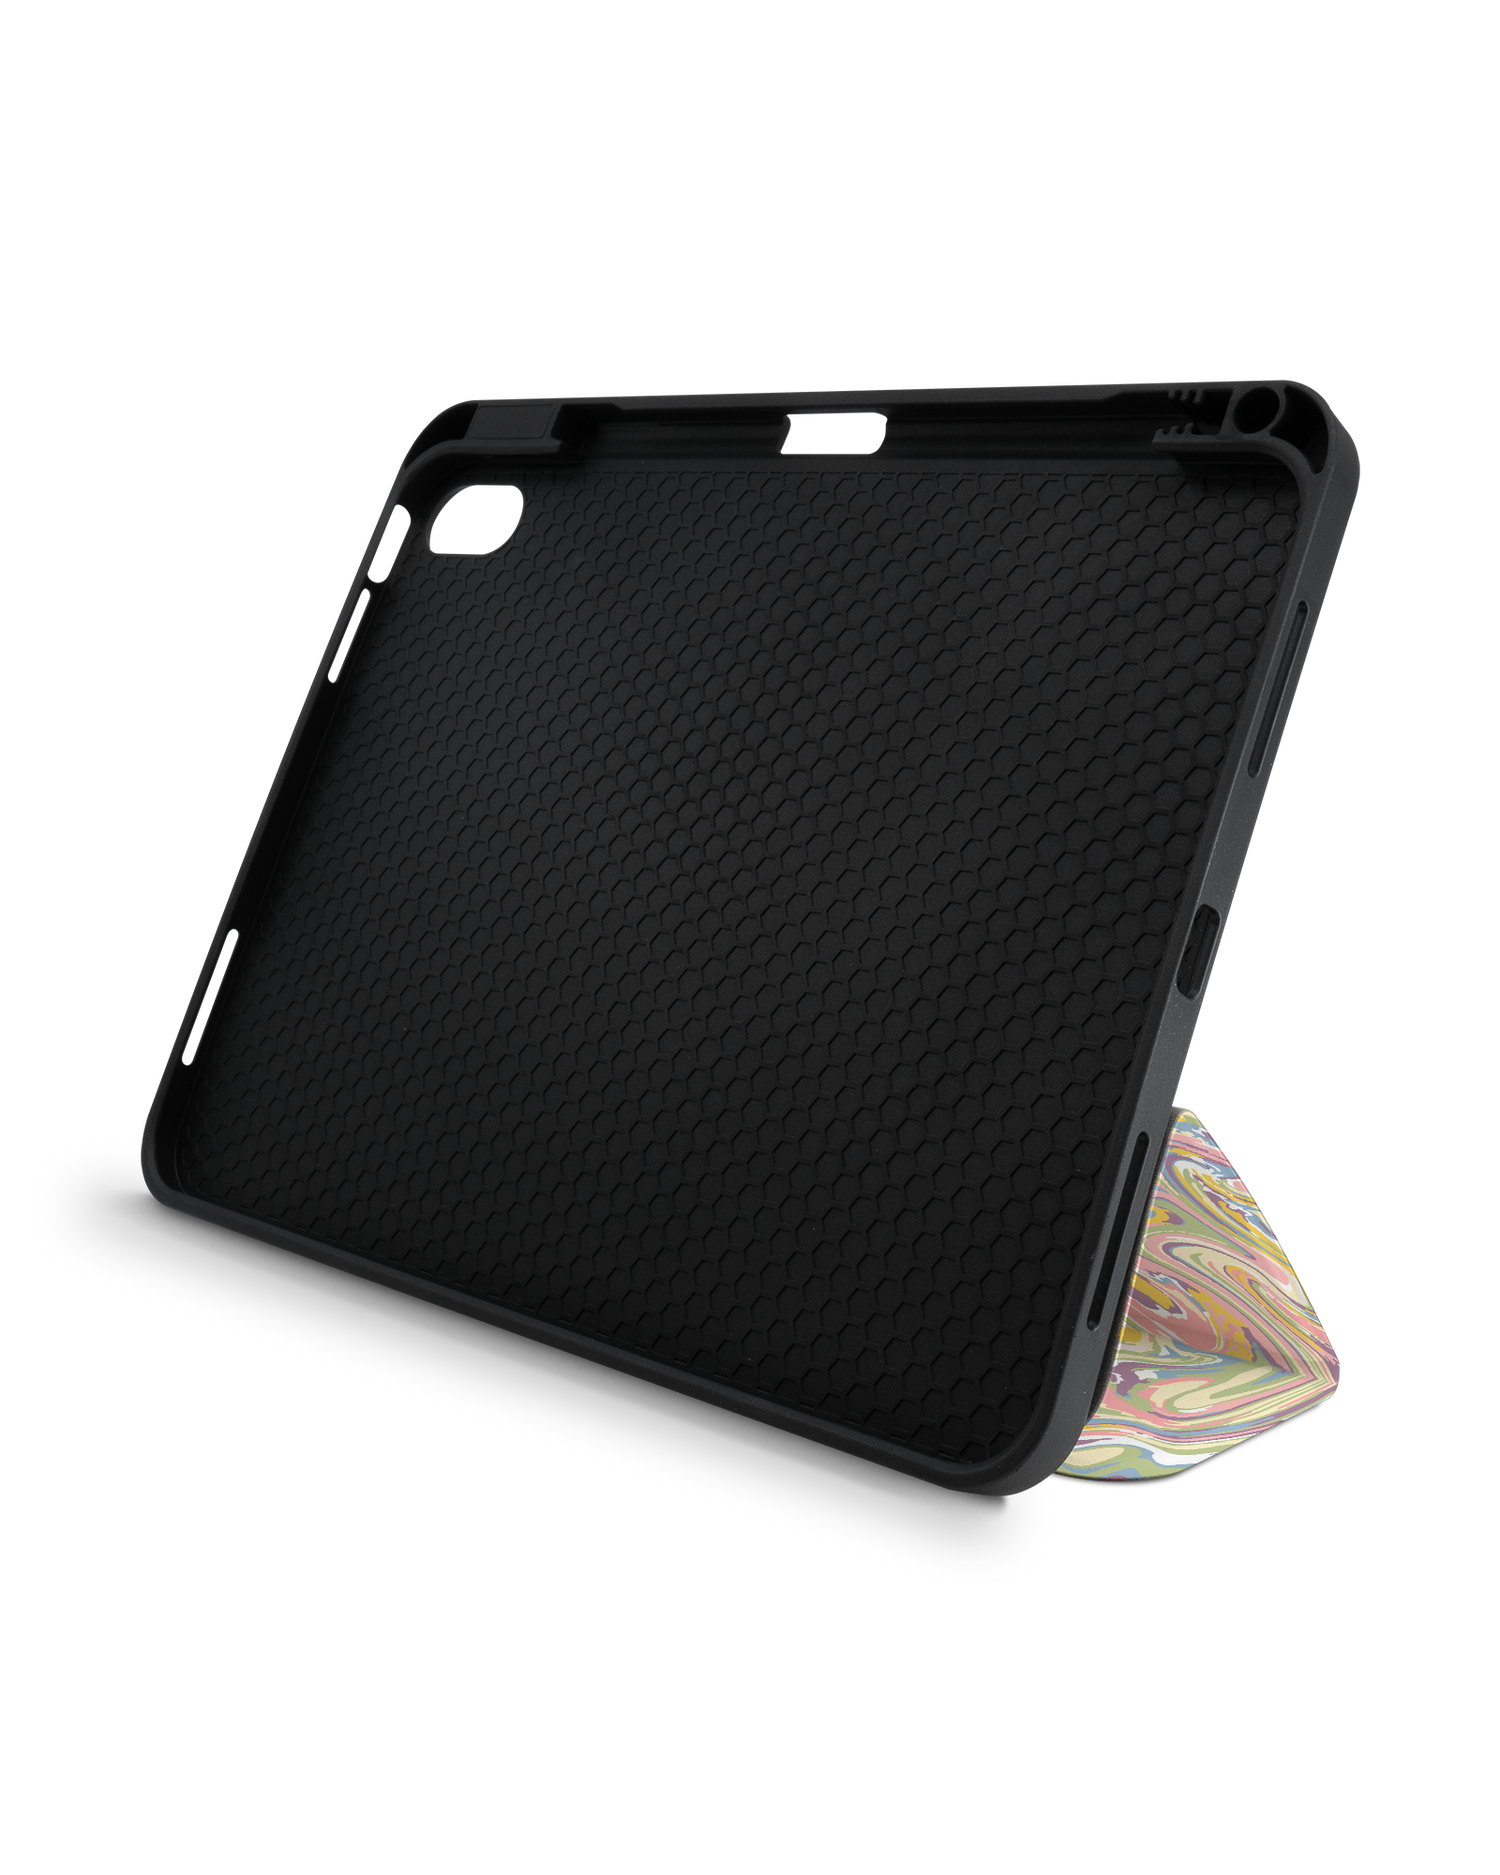 Psychedelic Optics iPad Case with Pencil Holder for Apple iPad (10th Generation): Set up in landscape format (front view)